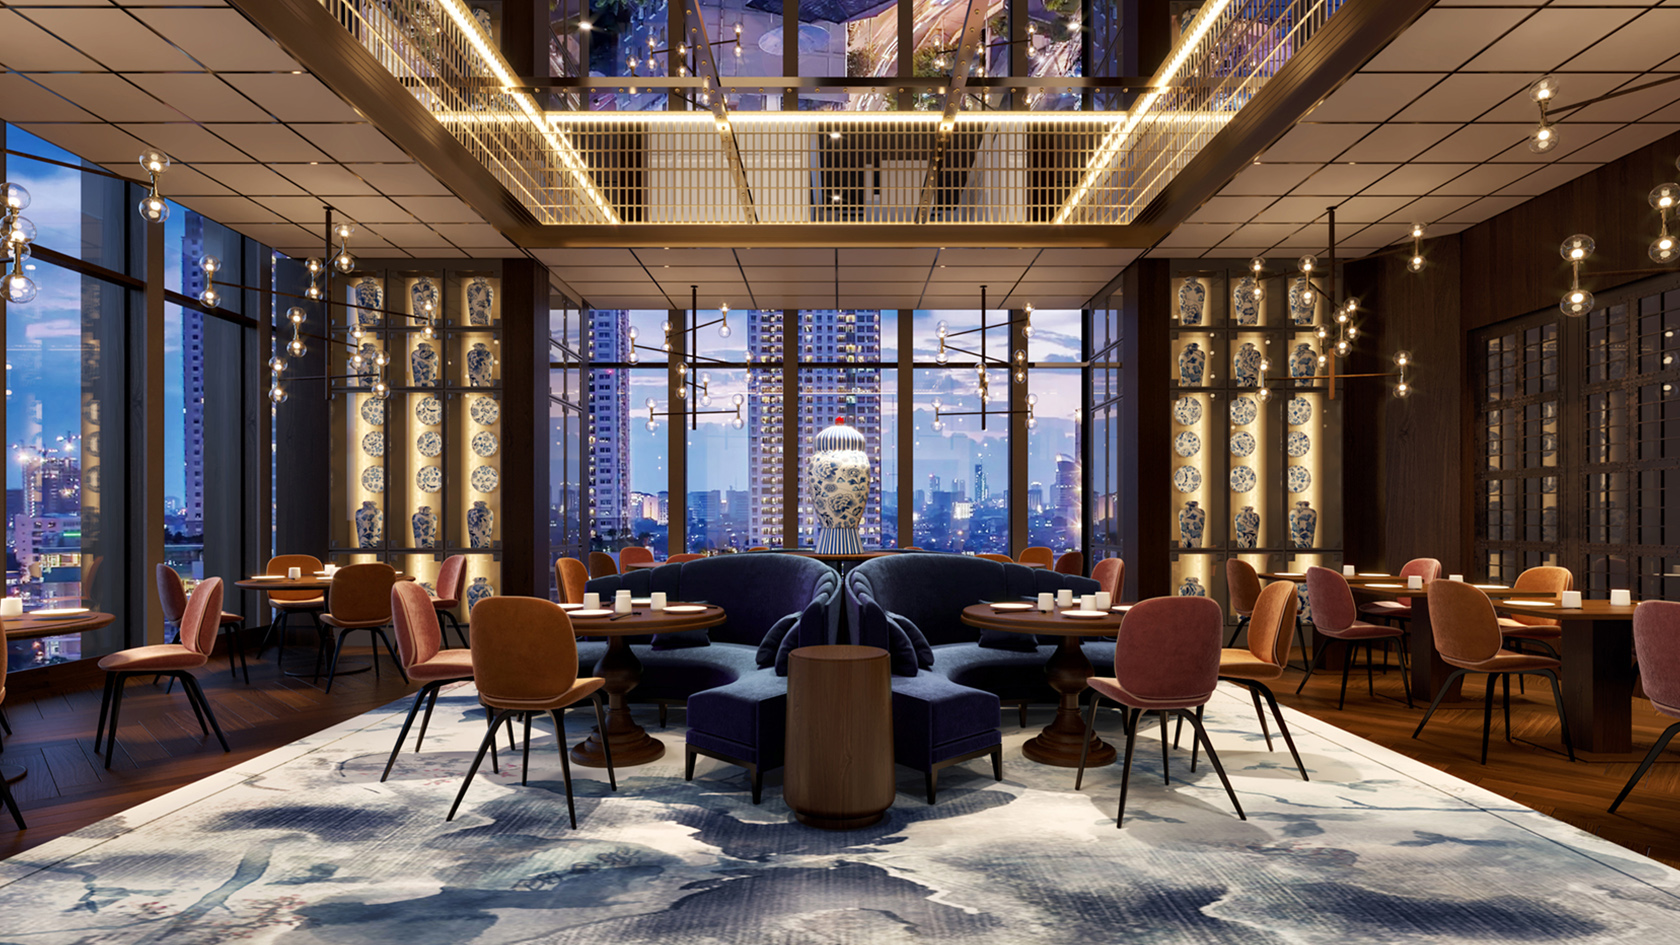 T'ang Court, The Langham’s signature Michelin-starred Chinese restaurant, brings Cantonese cuisine from China to Jakarta.